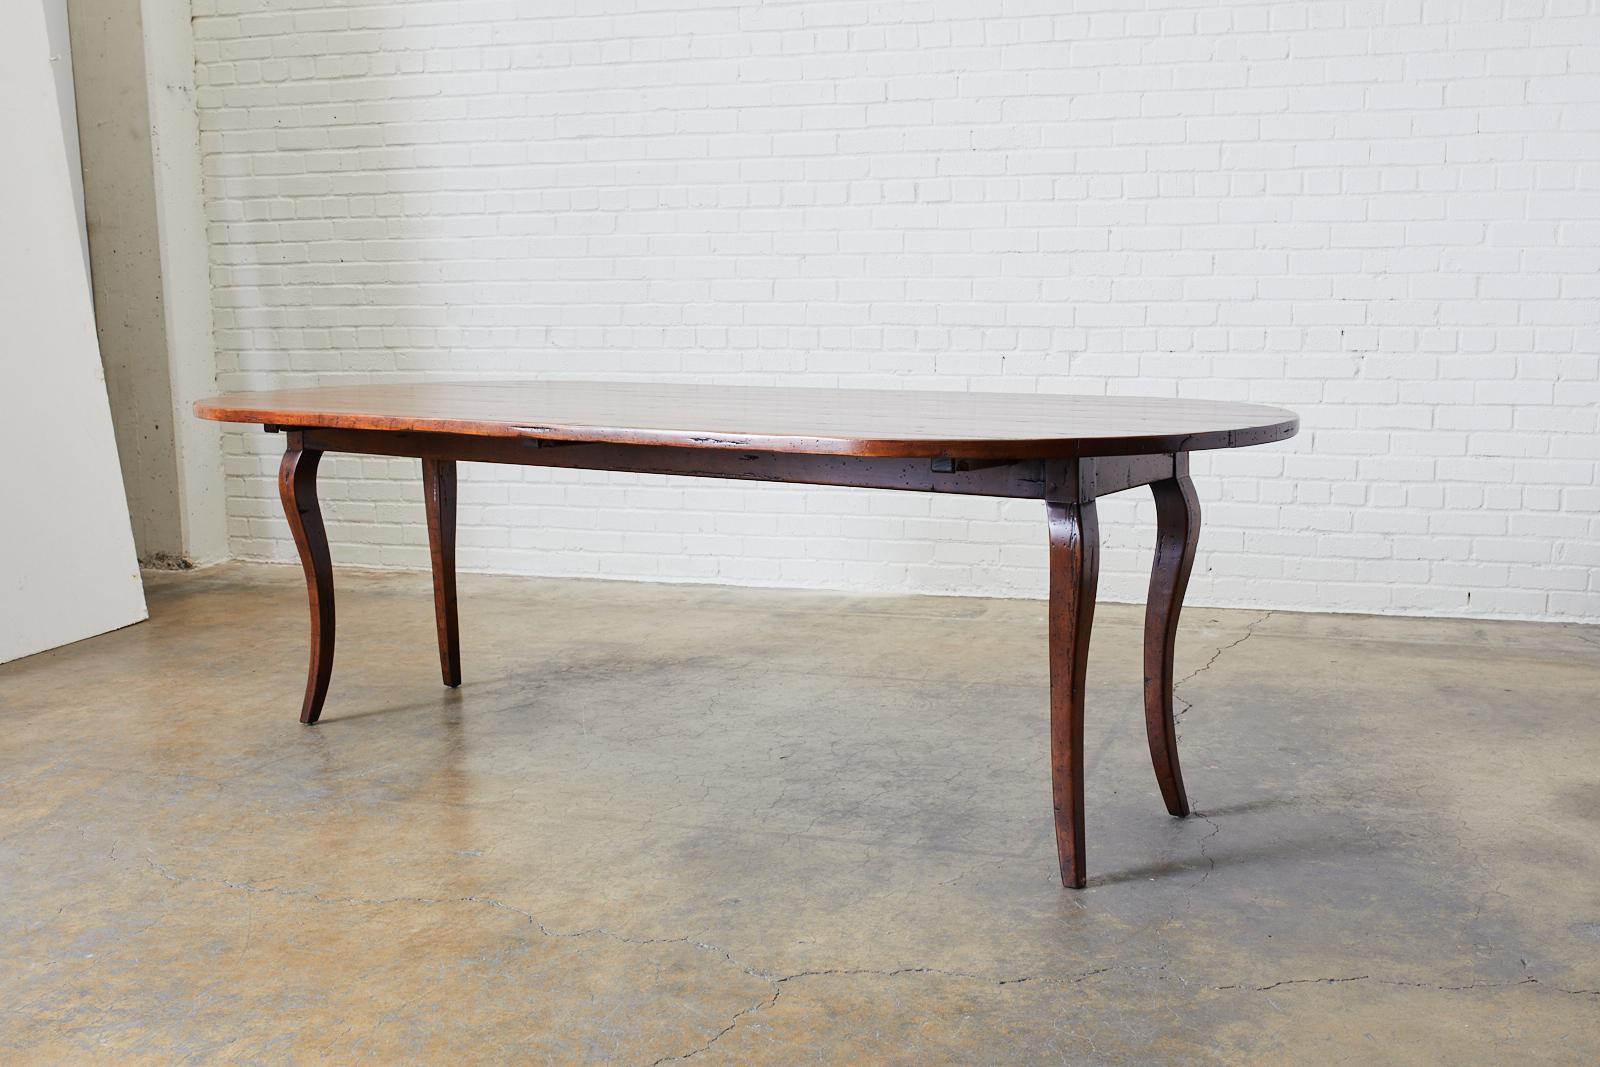 Rustic Mahogany Drop-Leaf Hunt Dining Table or Console